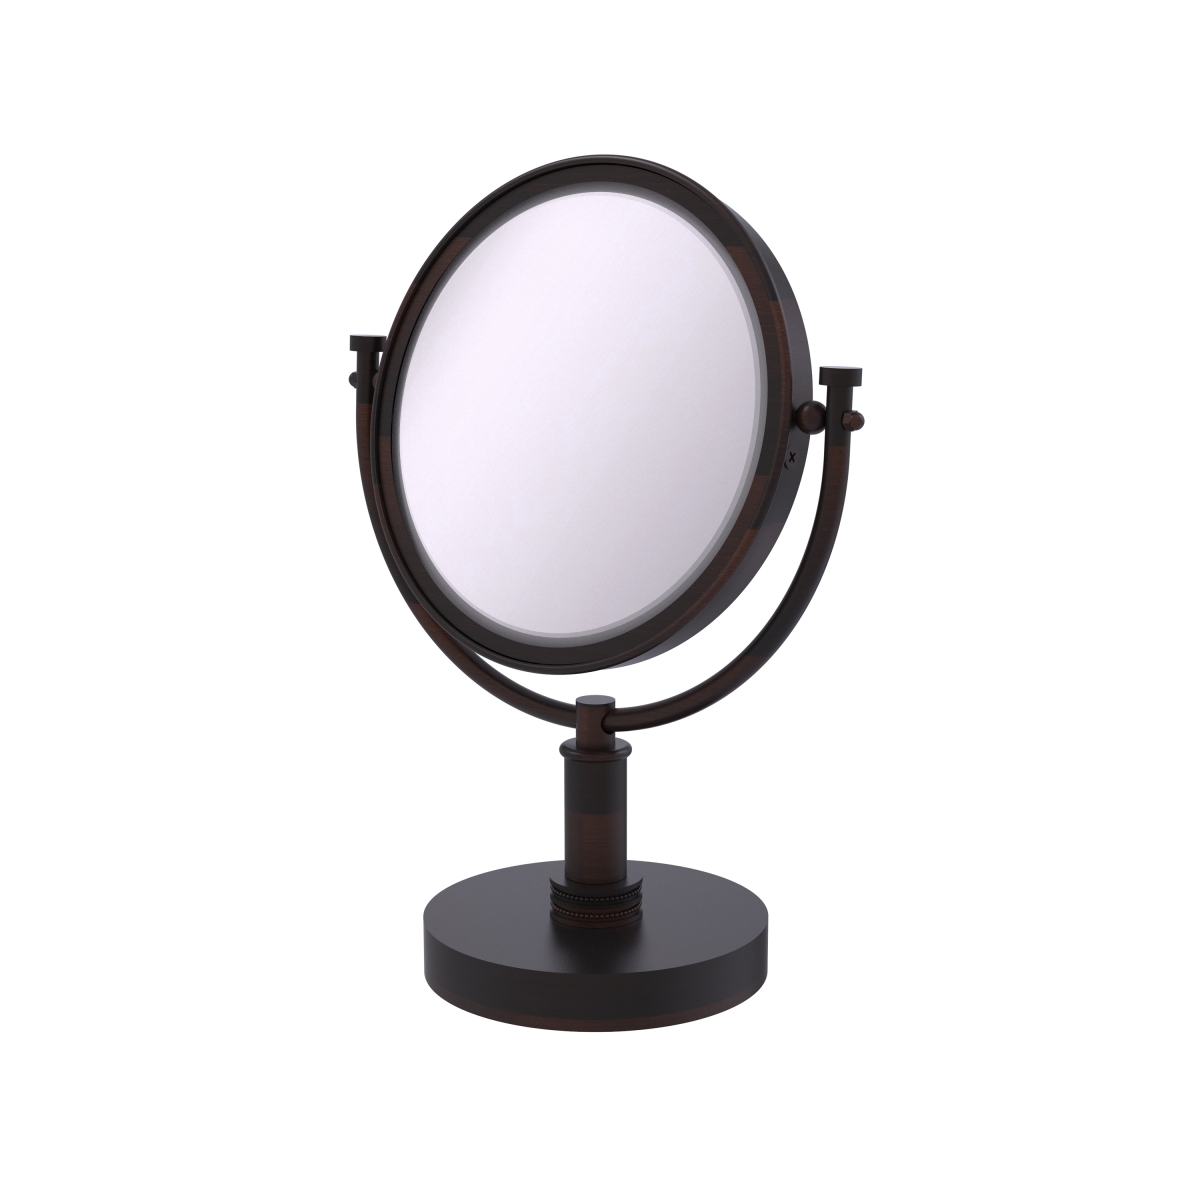 Picture of Allied Brass DM-4D-4X-VB 8 in. Vanity Top Make-Up Mirror 4X Magnification, Venetian Bronze - 15 x 8 x 8 in.